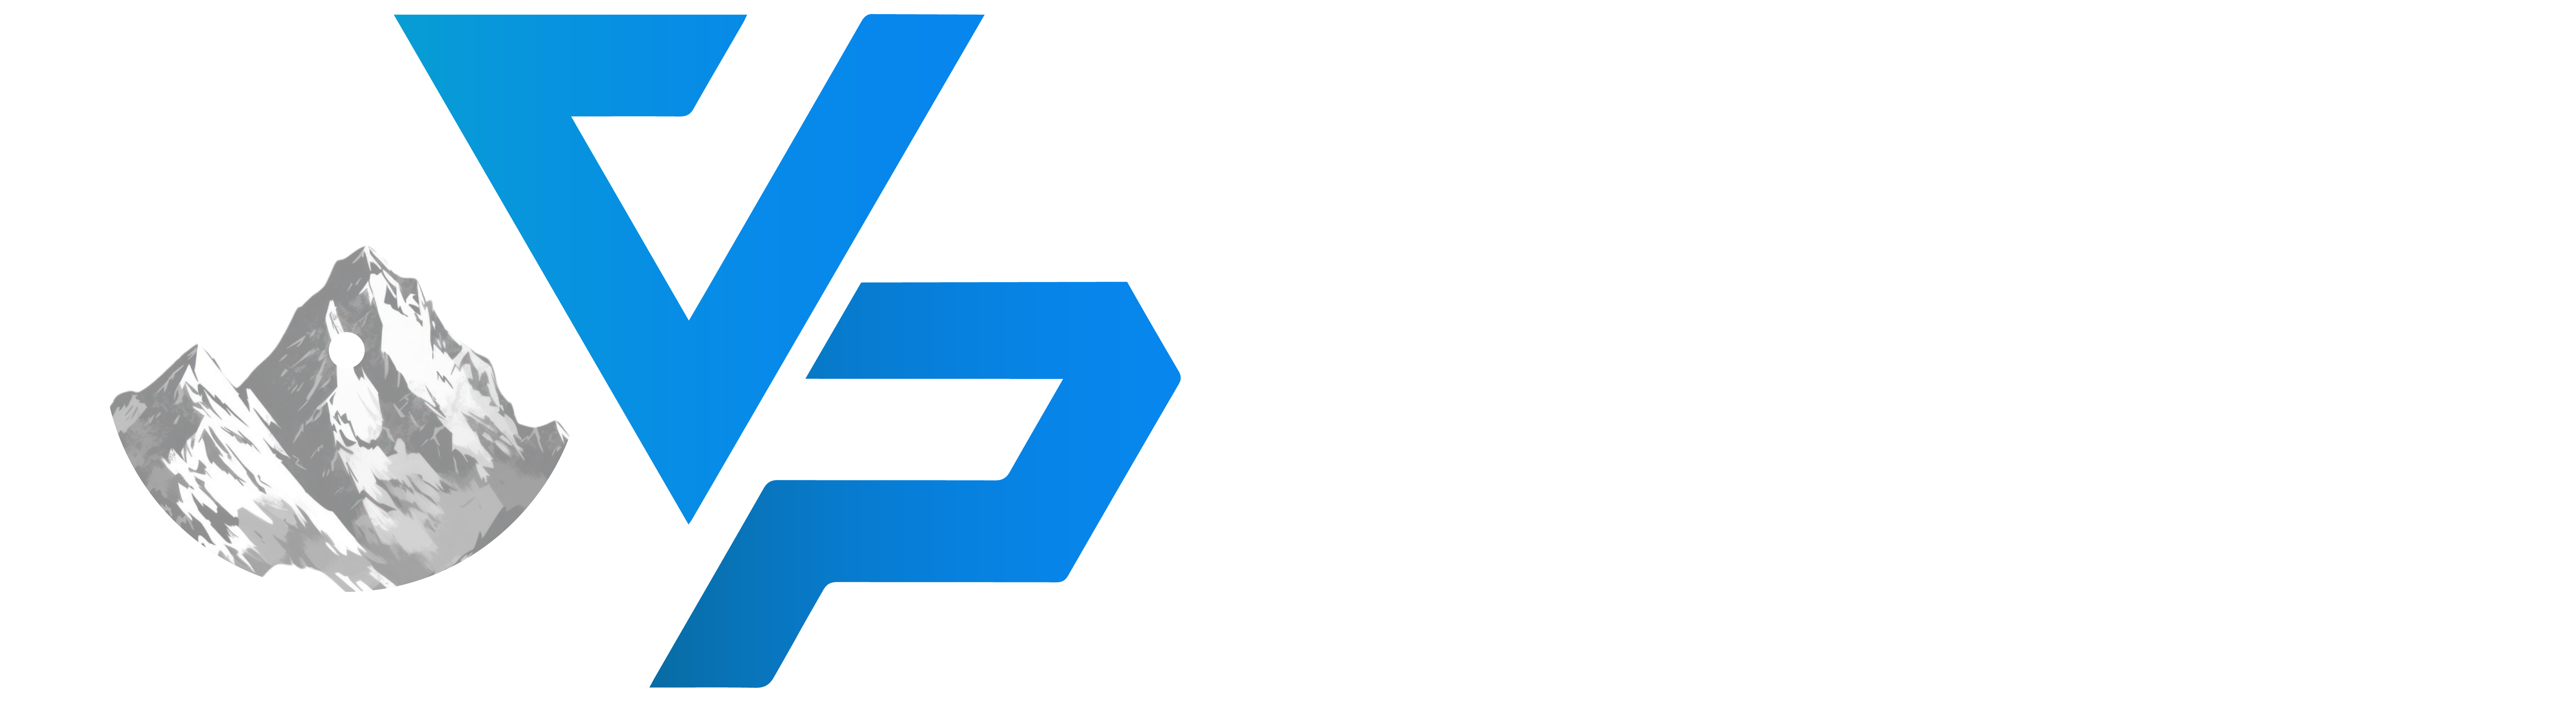 Vantage Point Firearms, Range, and Training Center logo - Representing excellence in firearms, training, and shooting experiences in New London CT.